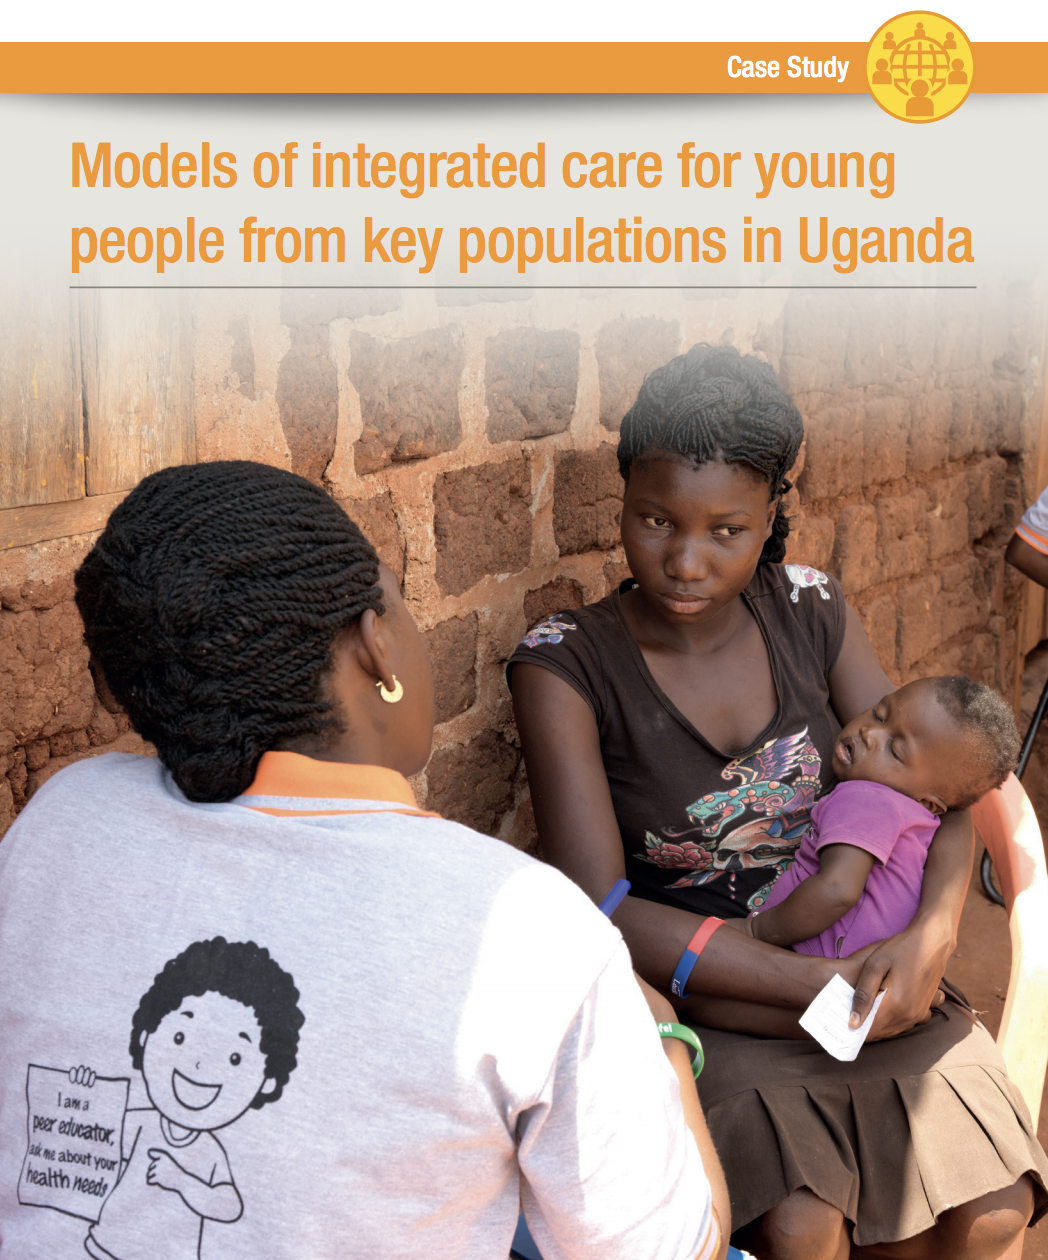 Models of Integrated Care for Young People from Key Populations in Uganda